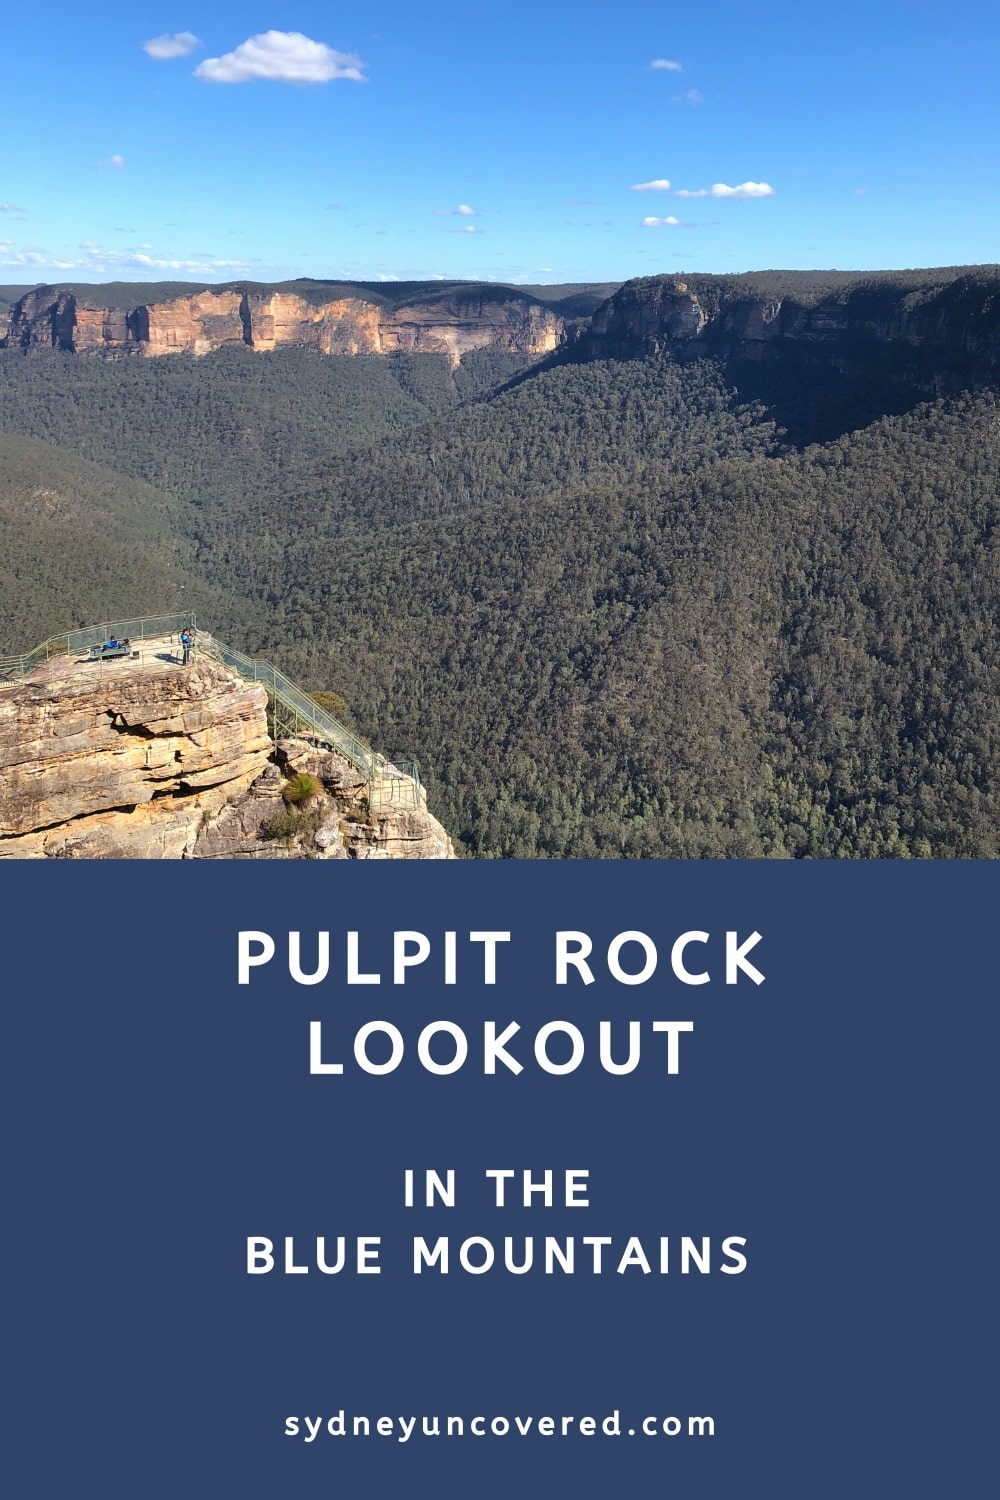 Pulpit Rock lookout in the Blue Mountains